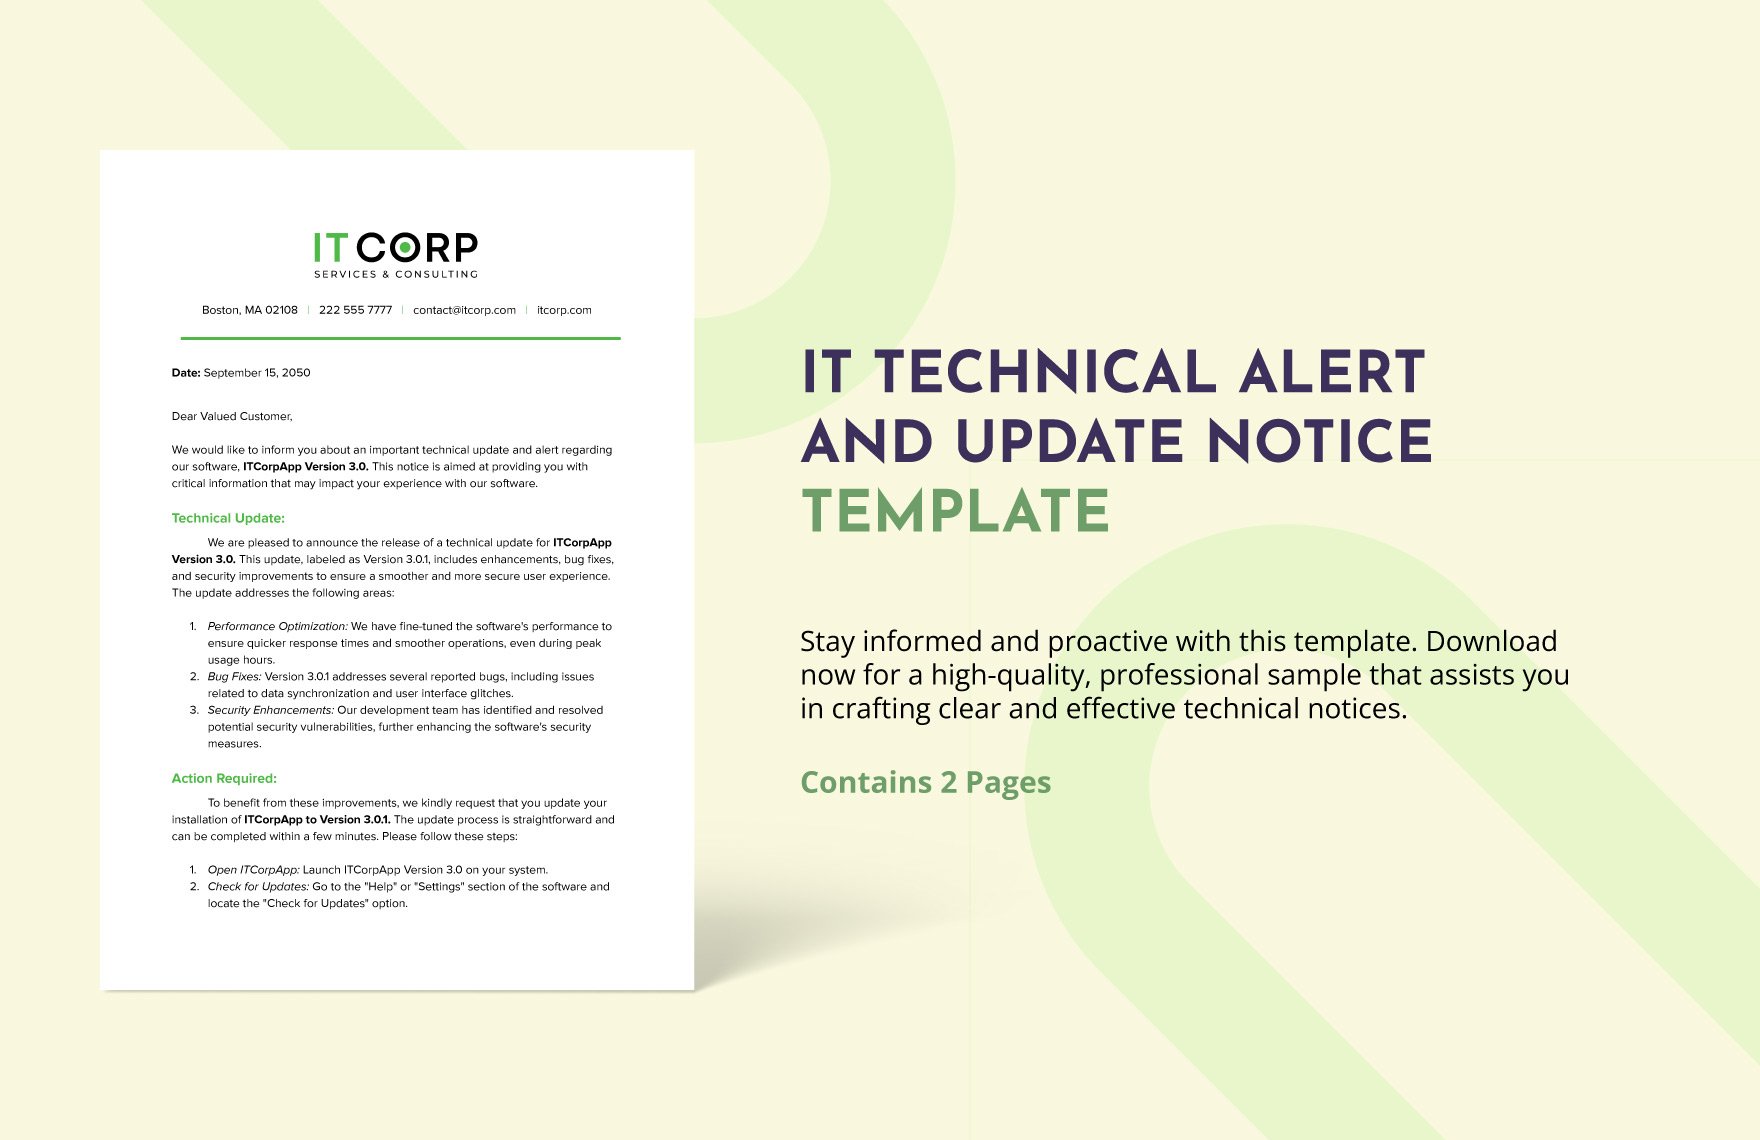 IT Technical Alert and Update Notice Template